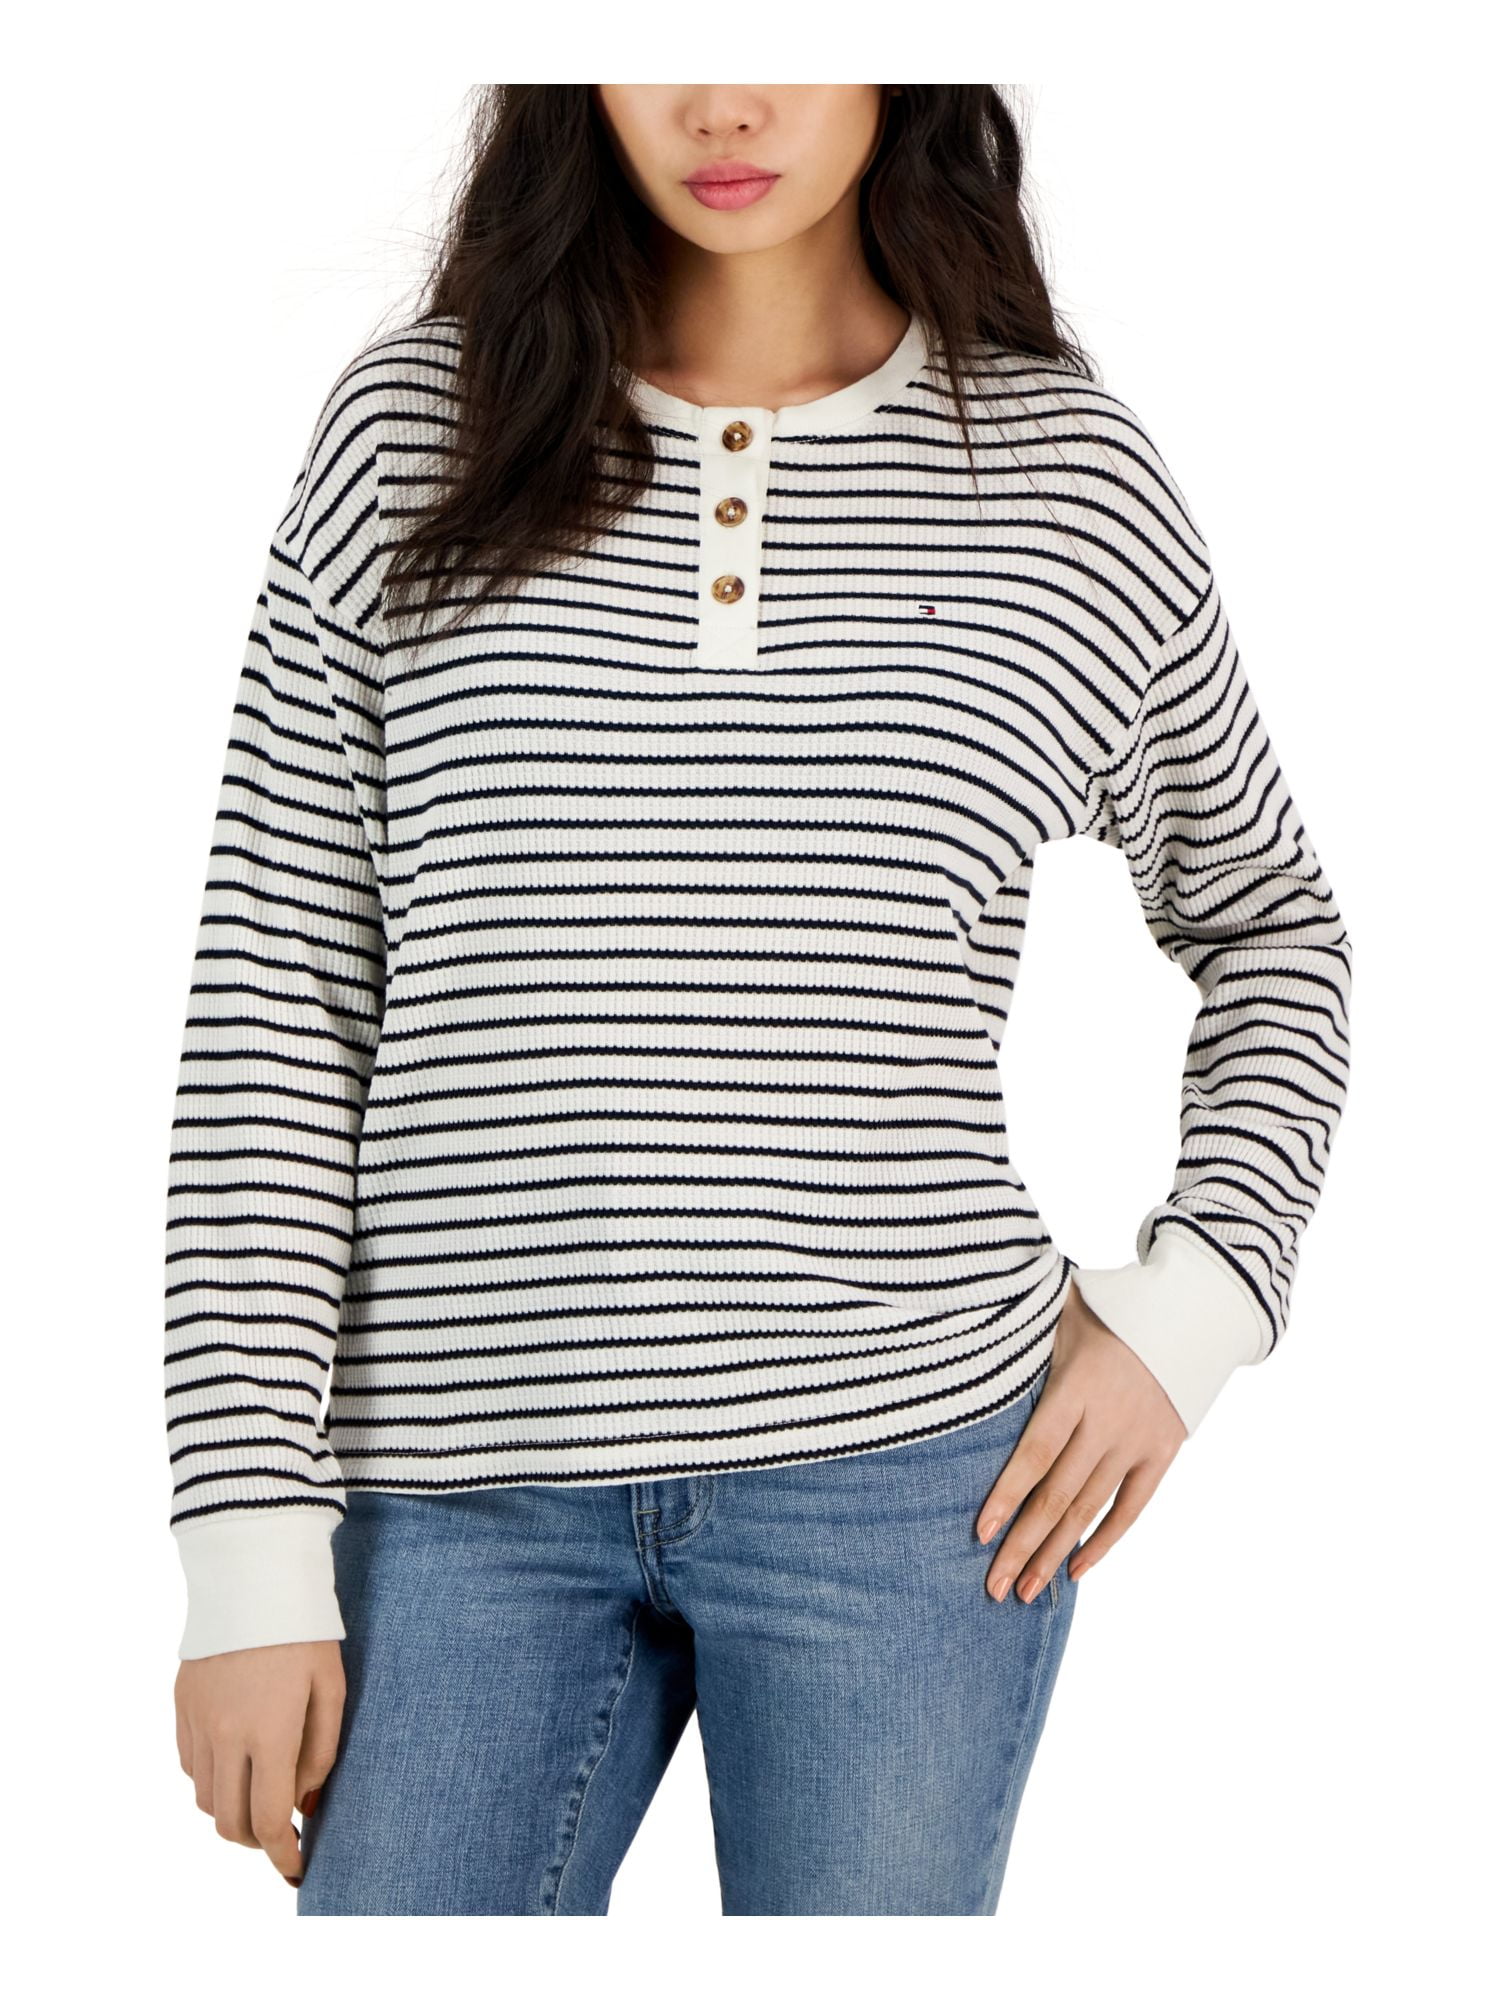 Tommy Hilfiger Women's Long Sleeve Striped Boxy Henley Top Red Size X-Large  